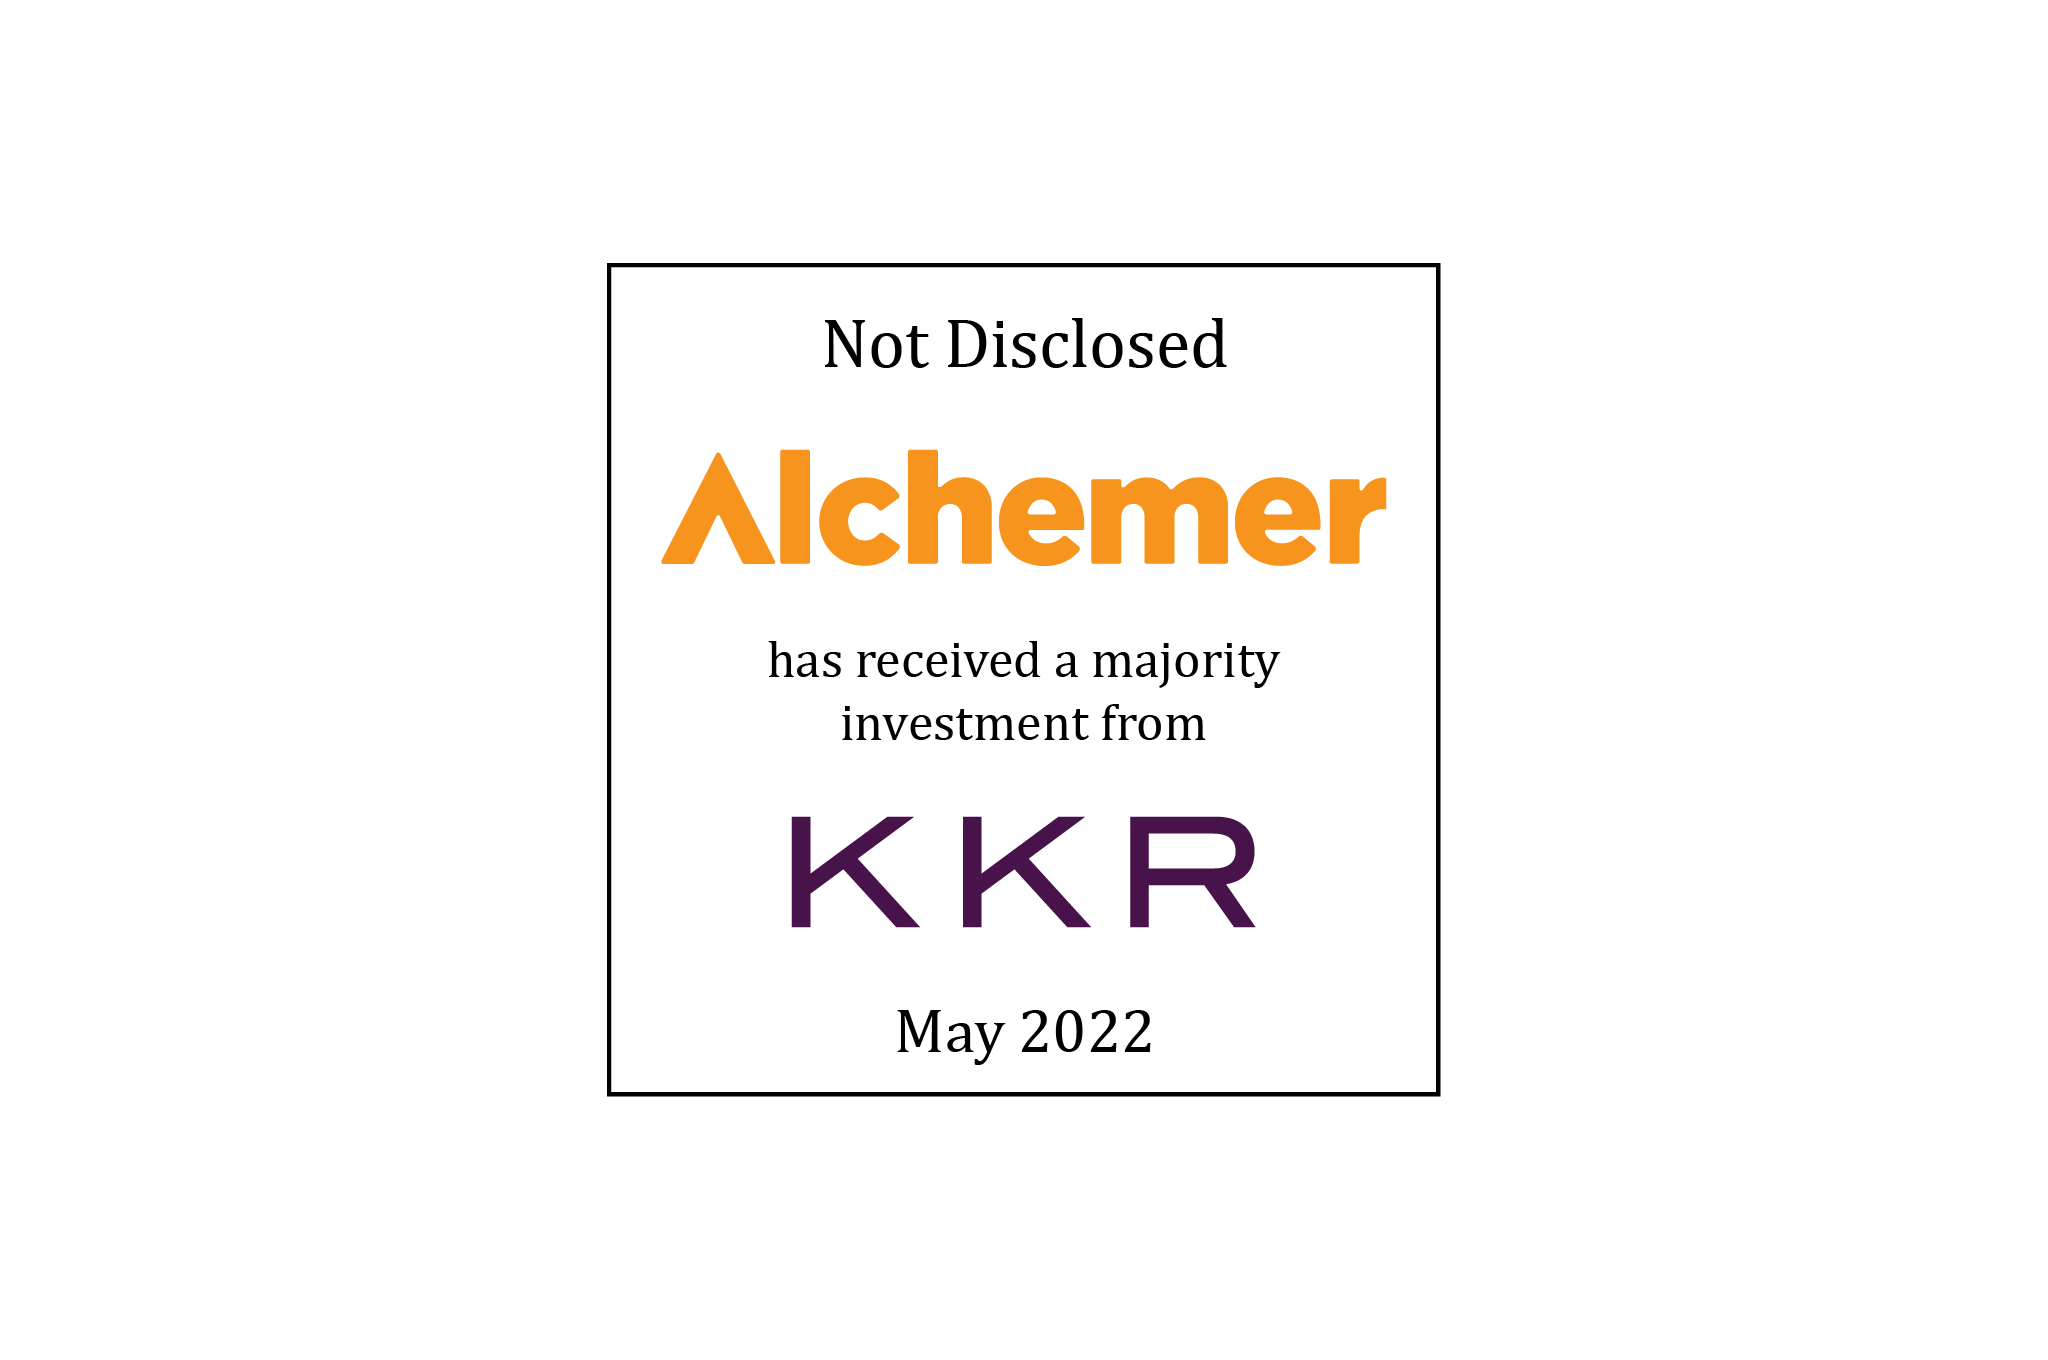 Alchemer (logo) has received a majority investment from KKR (logo)